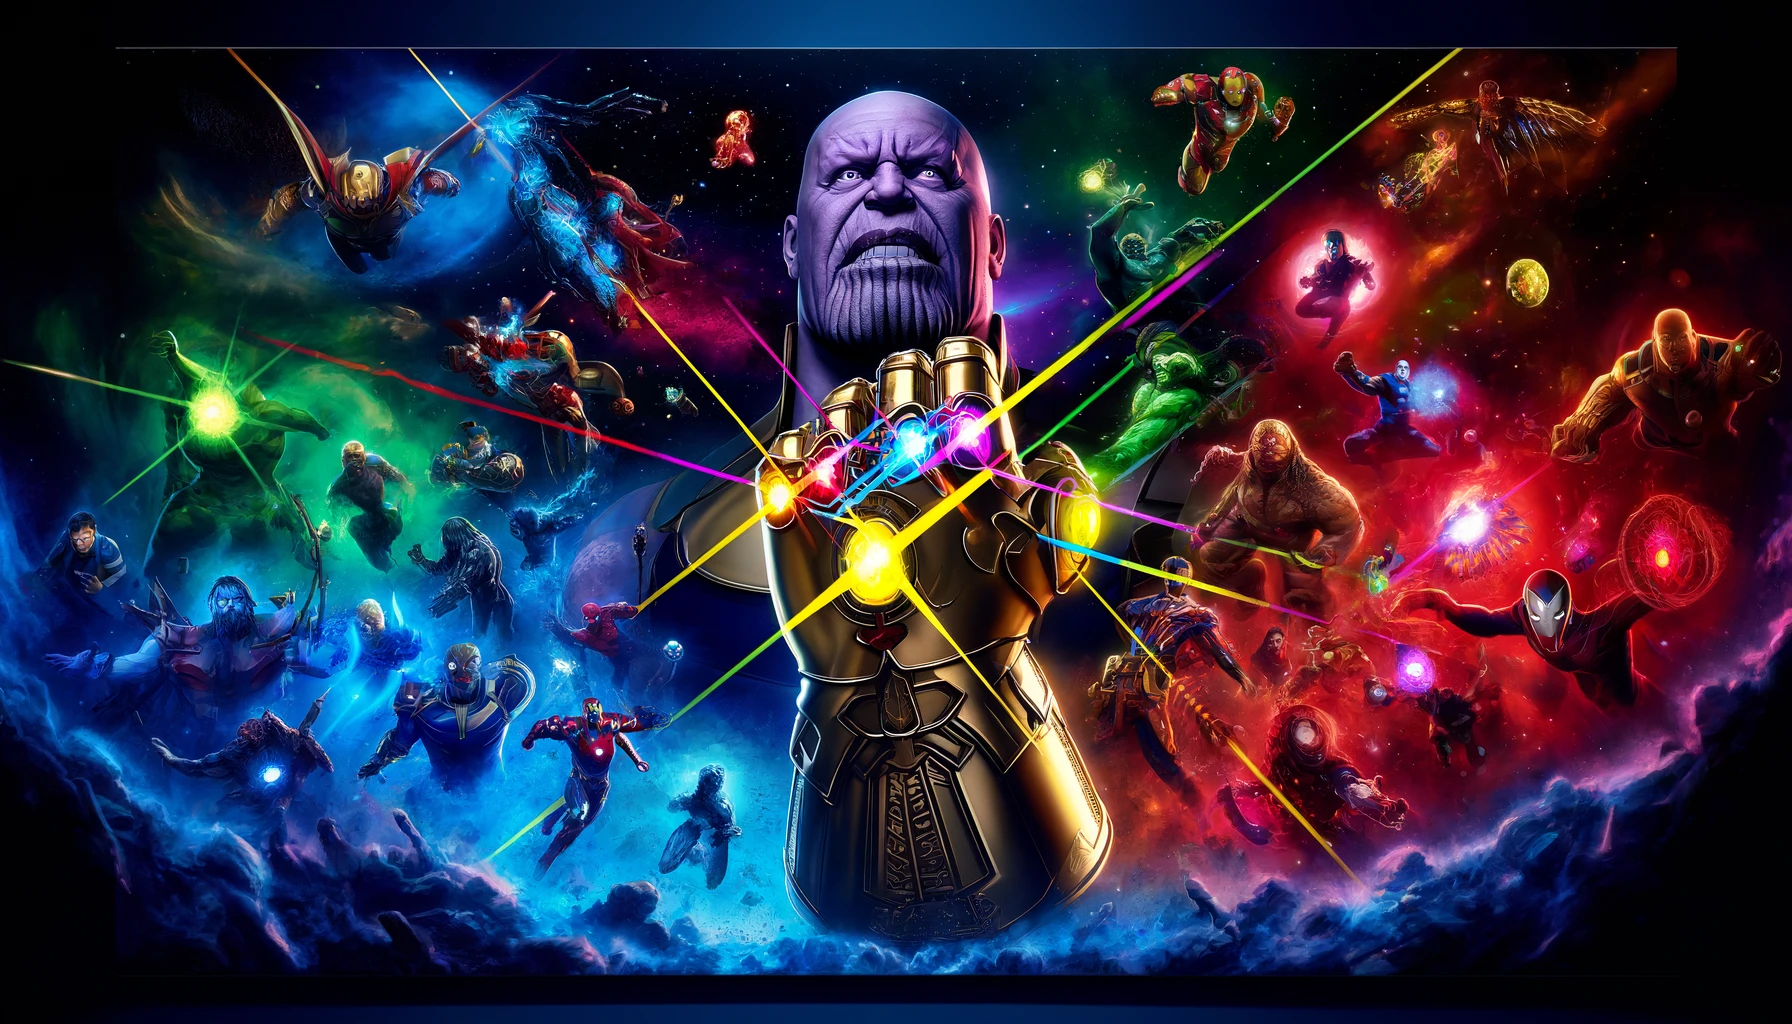 A vibrant illustration showing all the Infinity Stones together, their powers combined, creating a dynamic visual effect against a cosmic background.